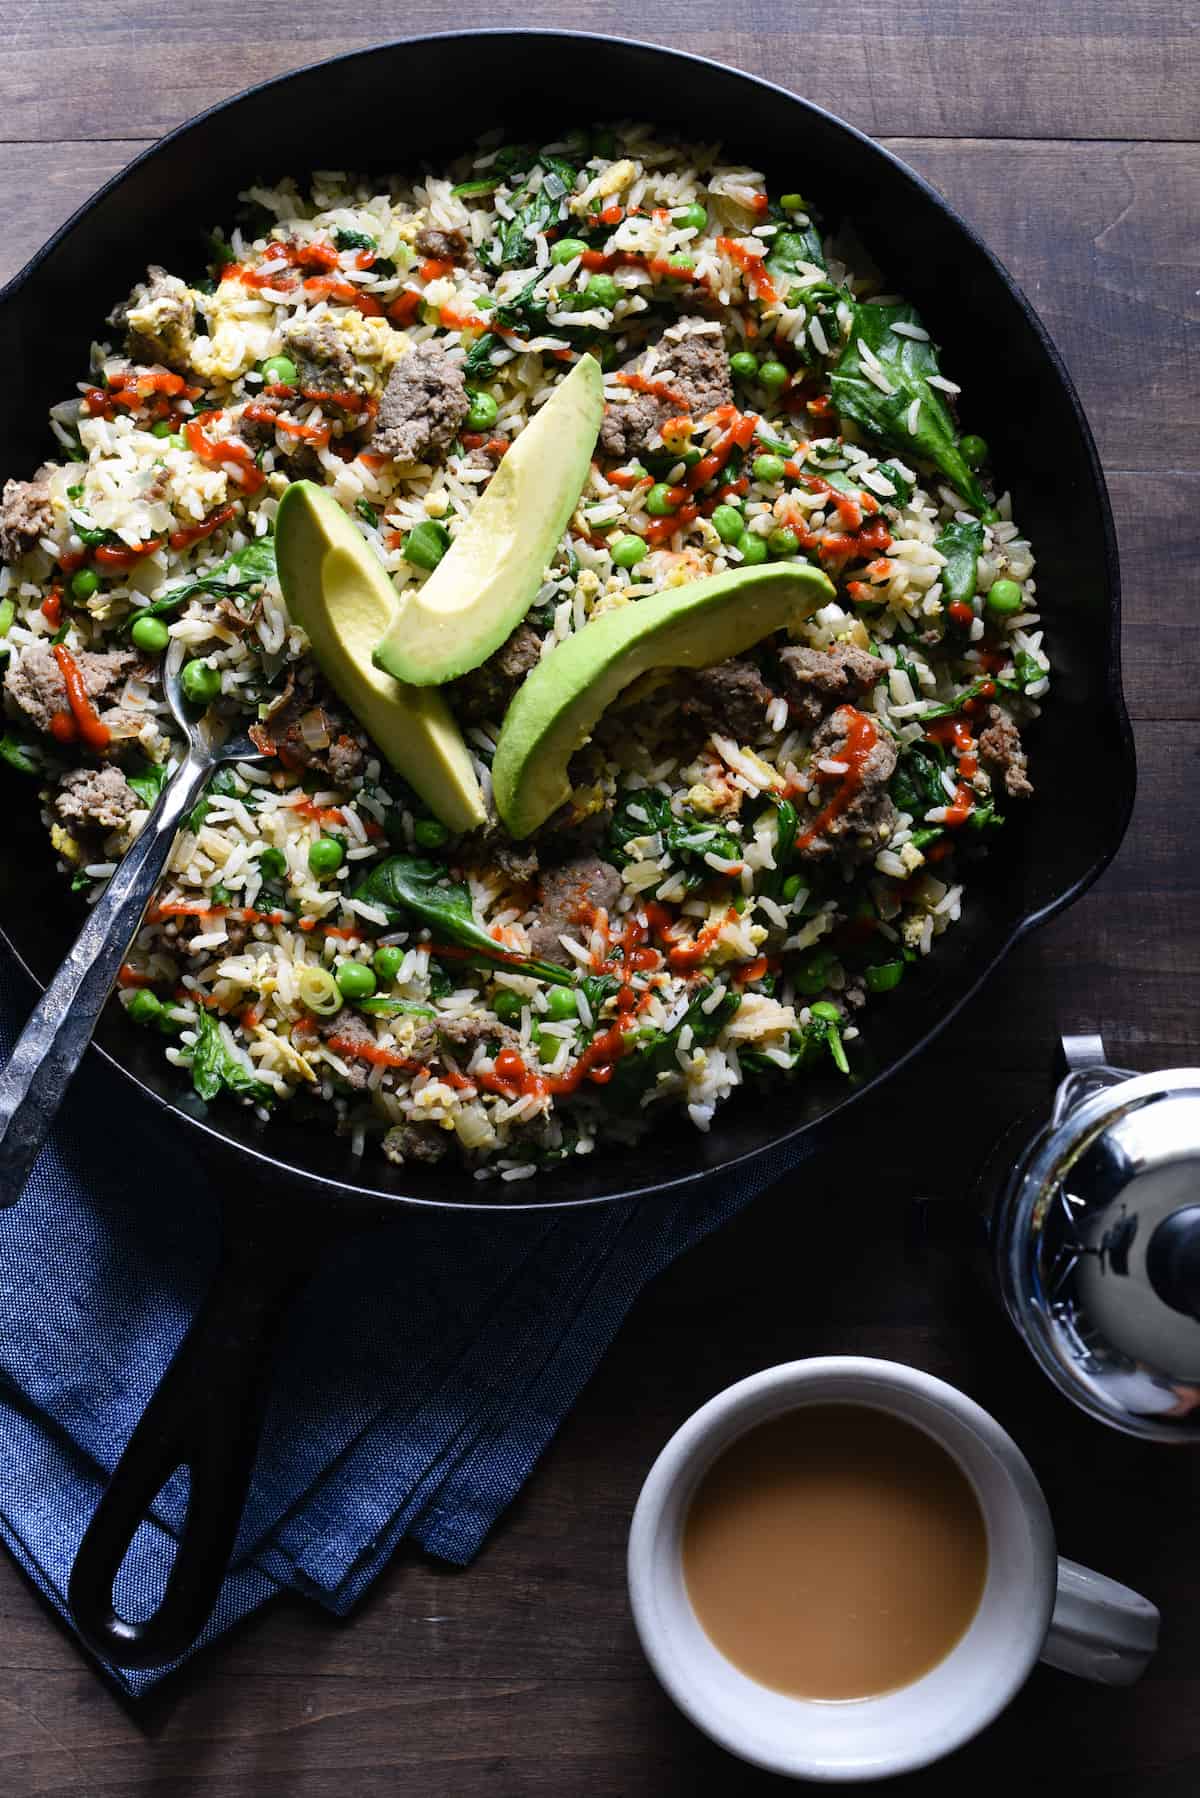 Cast iron skilled filled with breakfast fried rice, topped with avocado slices.